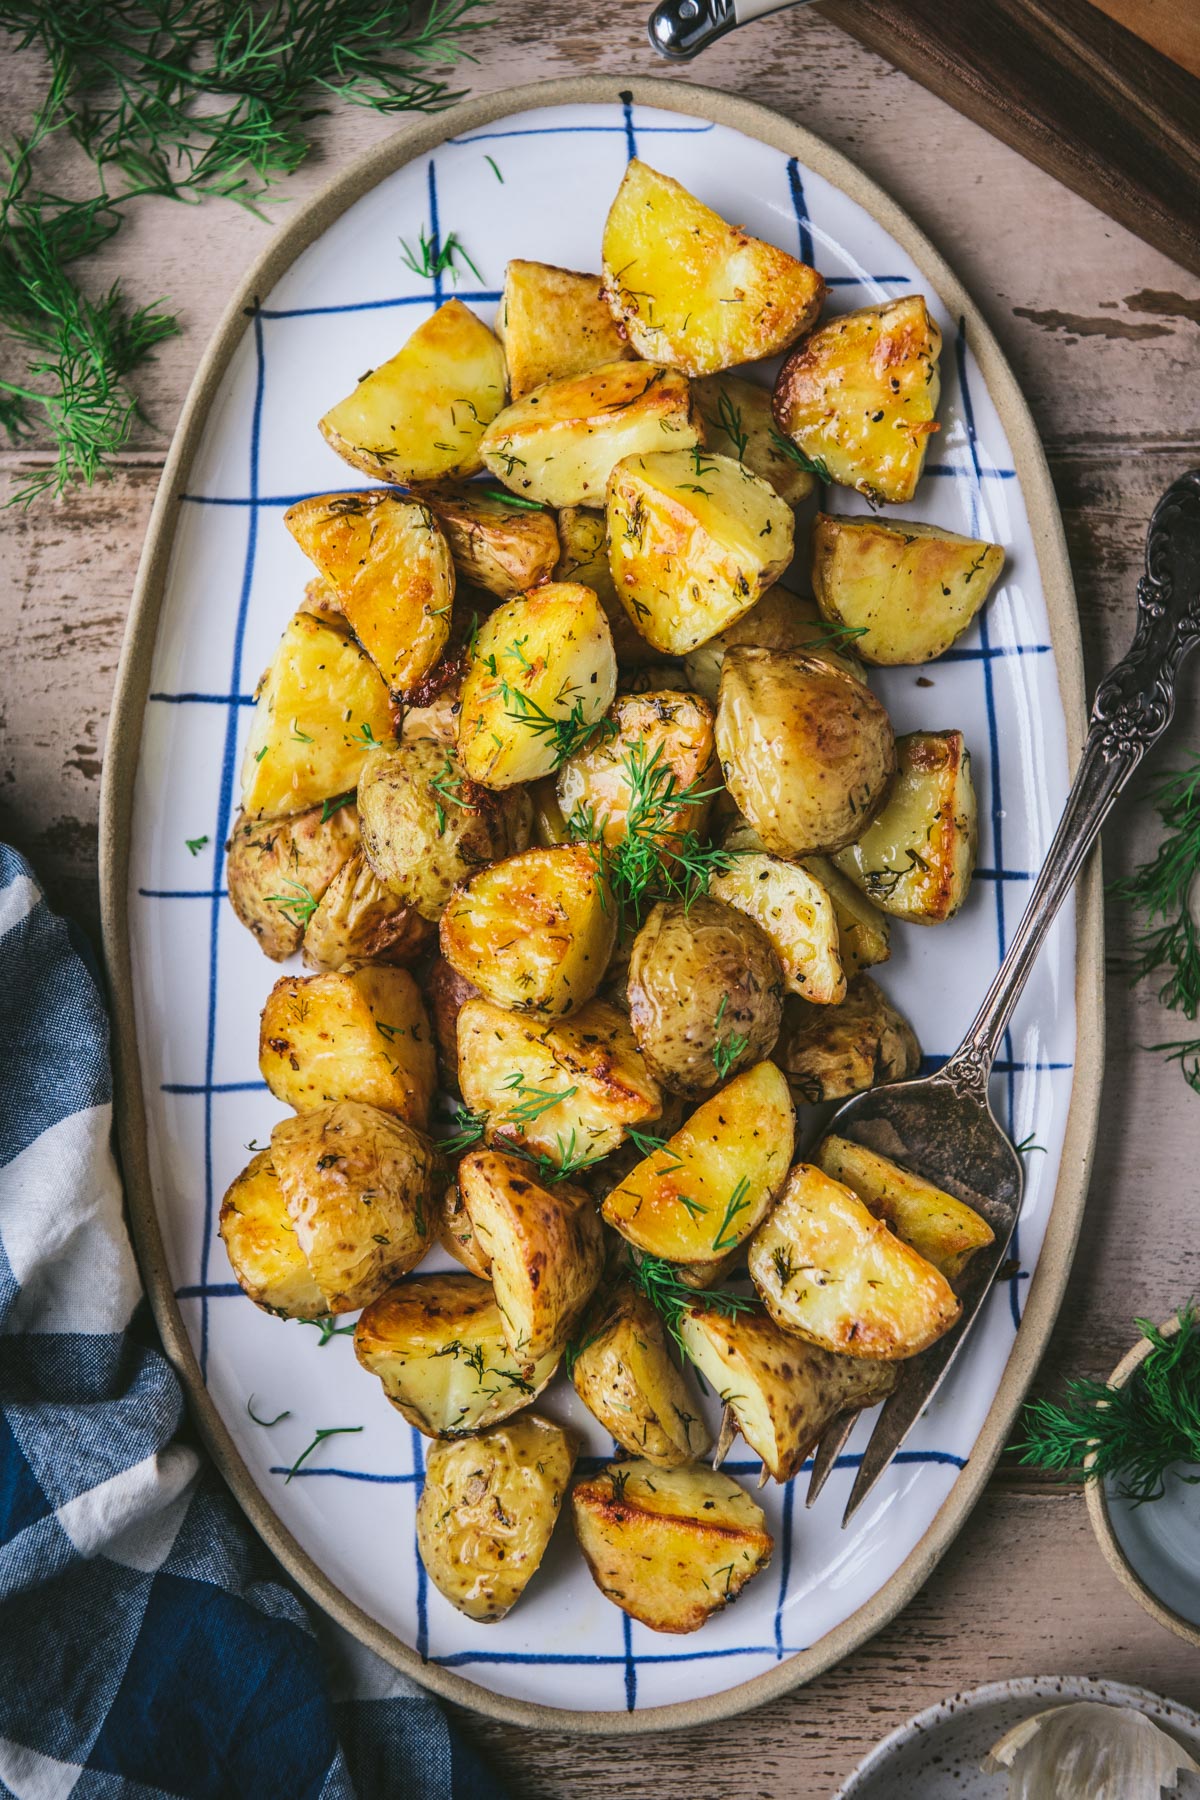 Serving spoon on a blue and white tray full of roasted potatoes with dill and lemon.